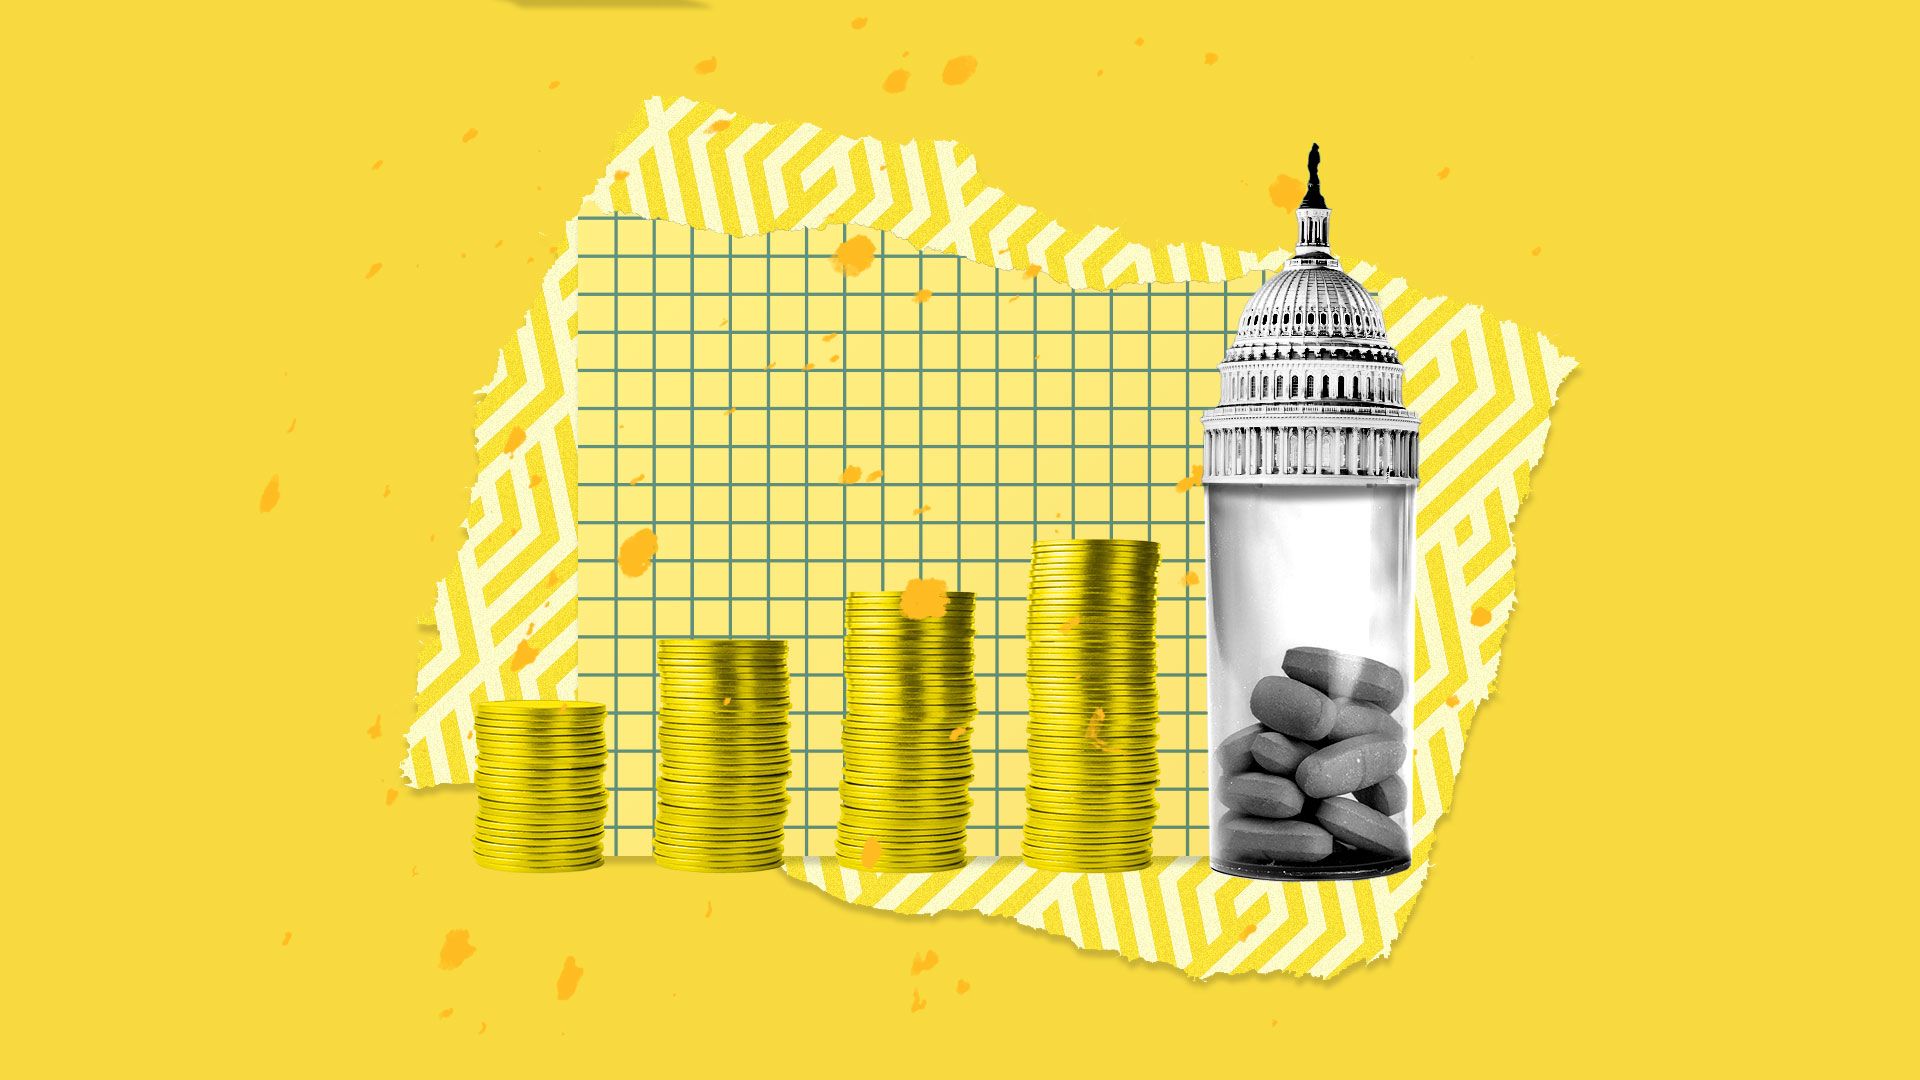 Collage illustration of Congress, coins and a medicine bottle.